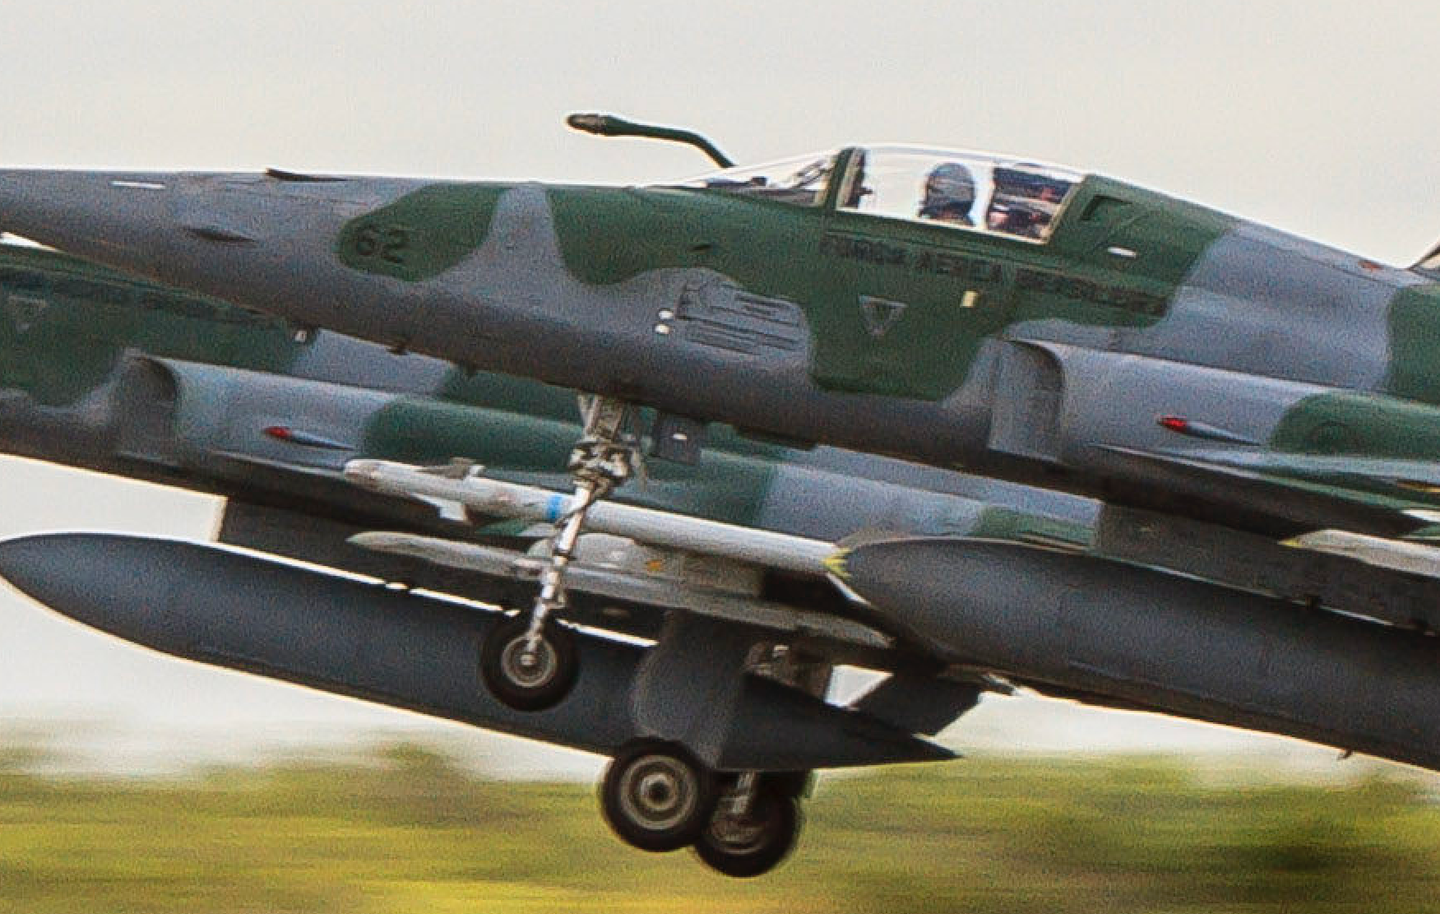 A Brazilian F-5 pair takes off, with a Python 4/AIM-9P-lookalike training round on the furthest aircraft. <em>Brazilian Air Force</em>